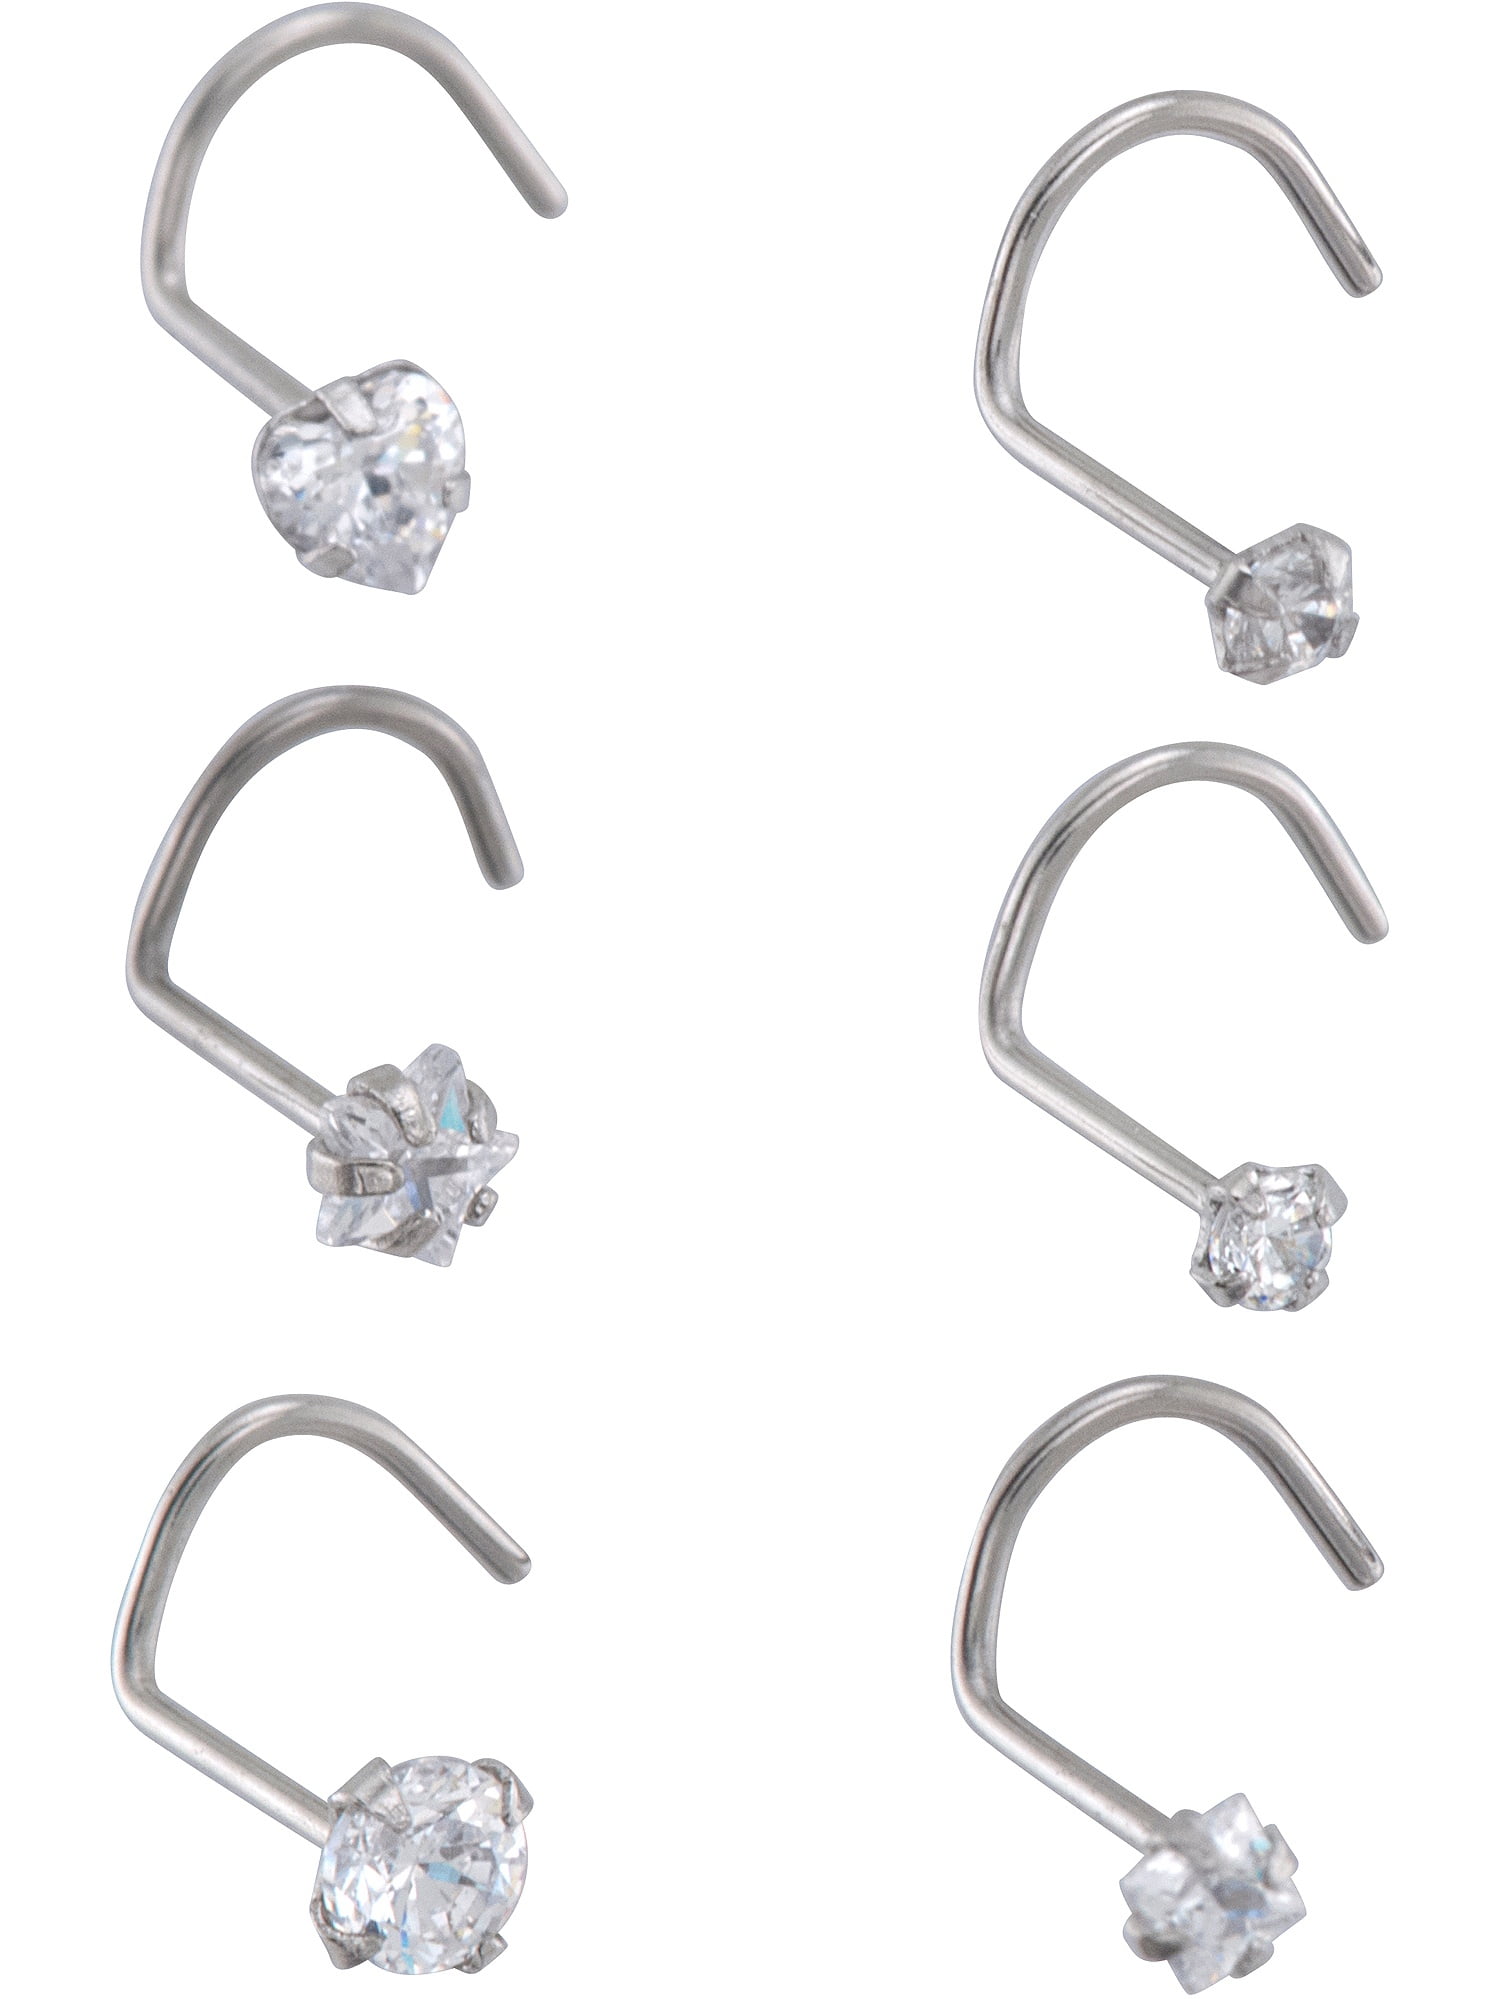 HOTSILVER Nose Studs Surgical Steel Screws with White CZ